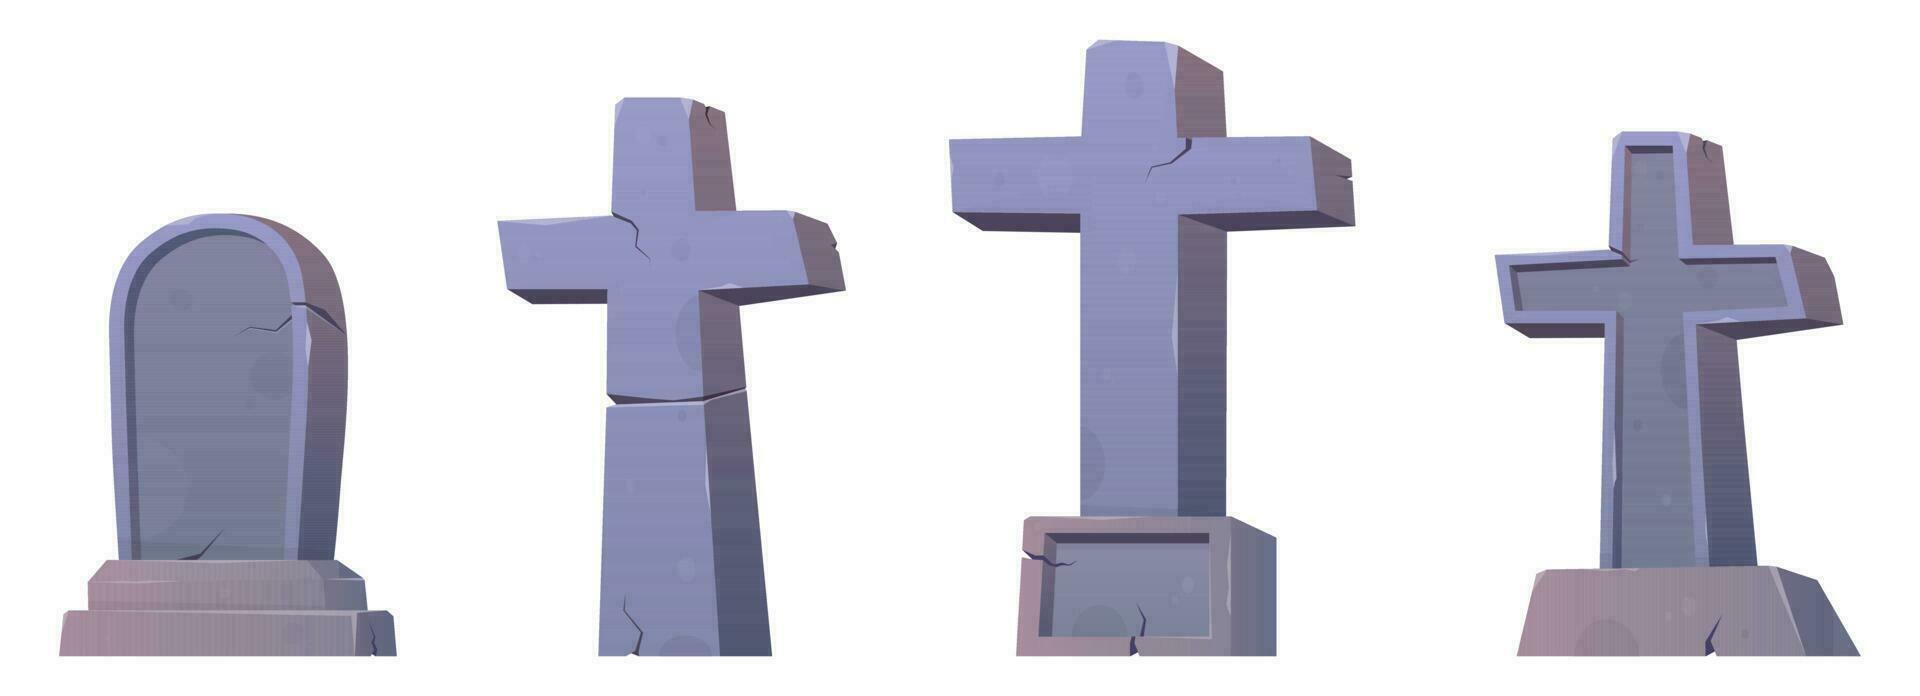 Gothic tombstones and stone crosses. Cemetery crosses, tomb mausoleum, pillar and ancient memorials with cracks vector